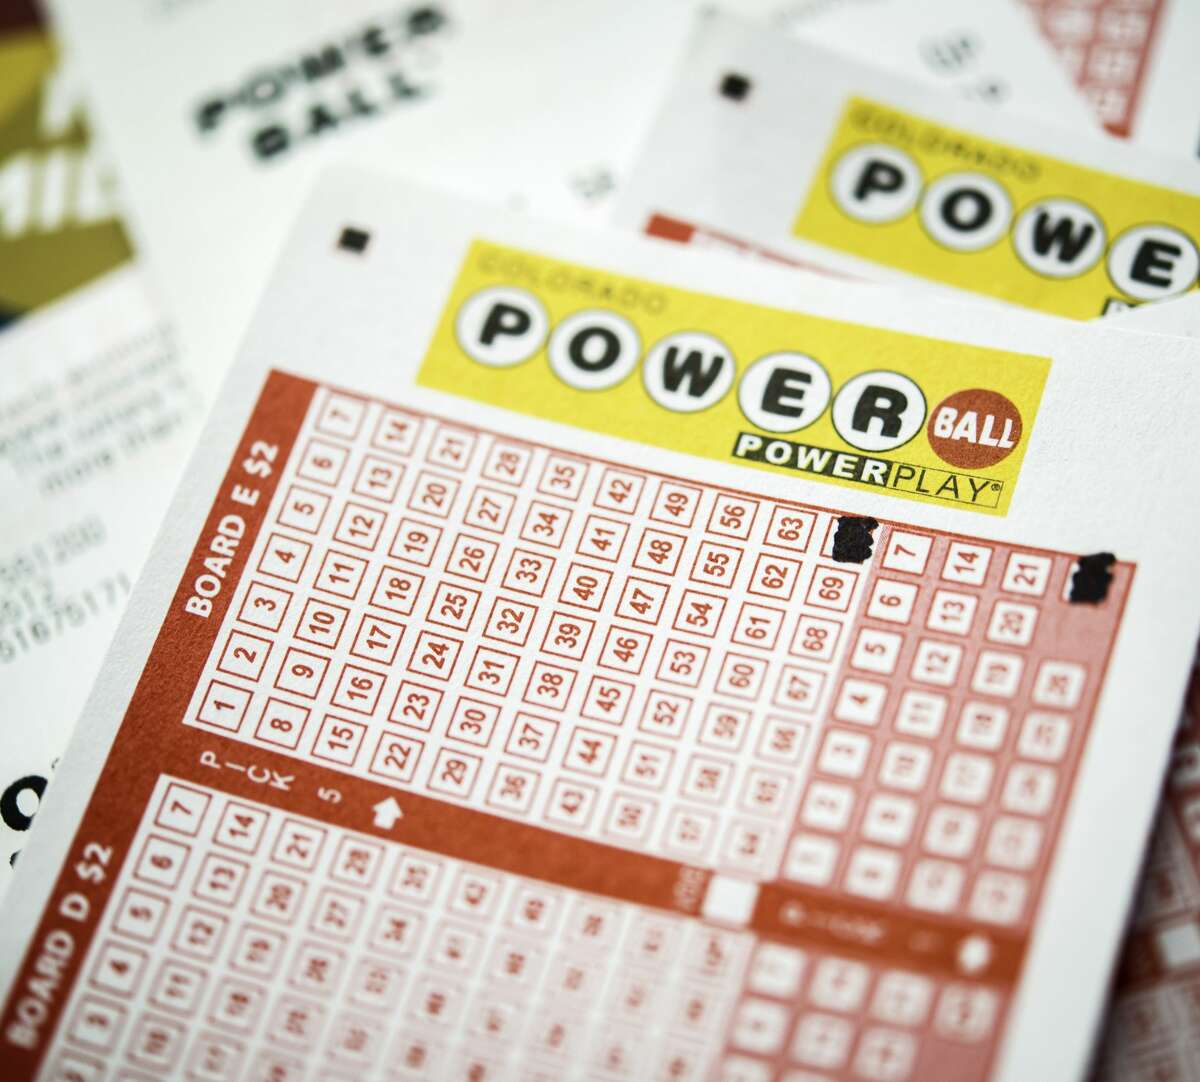 The Powerball jackpot is up to $500 million for the New Year's Day drawing on Saturday.